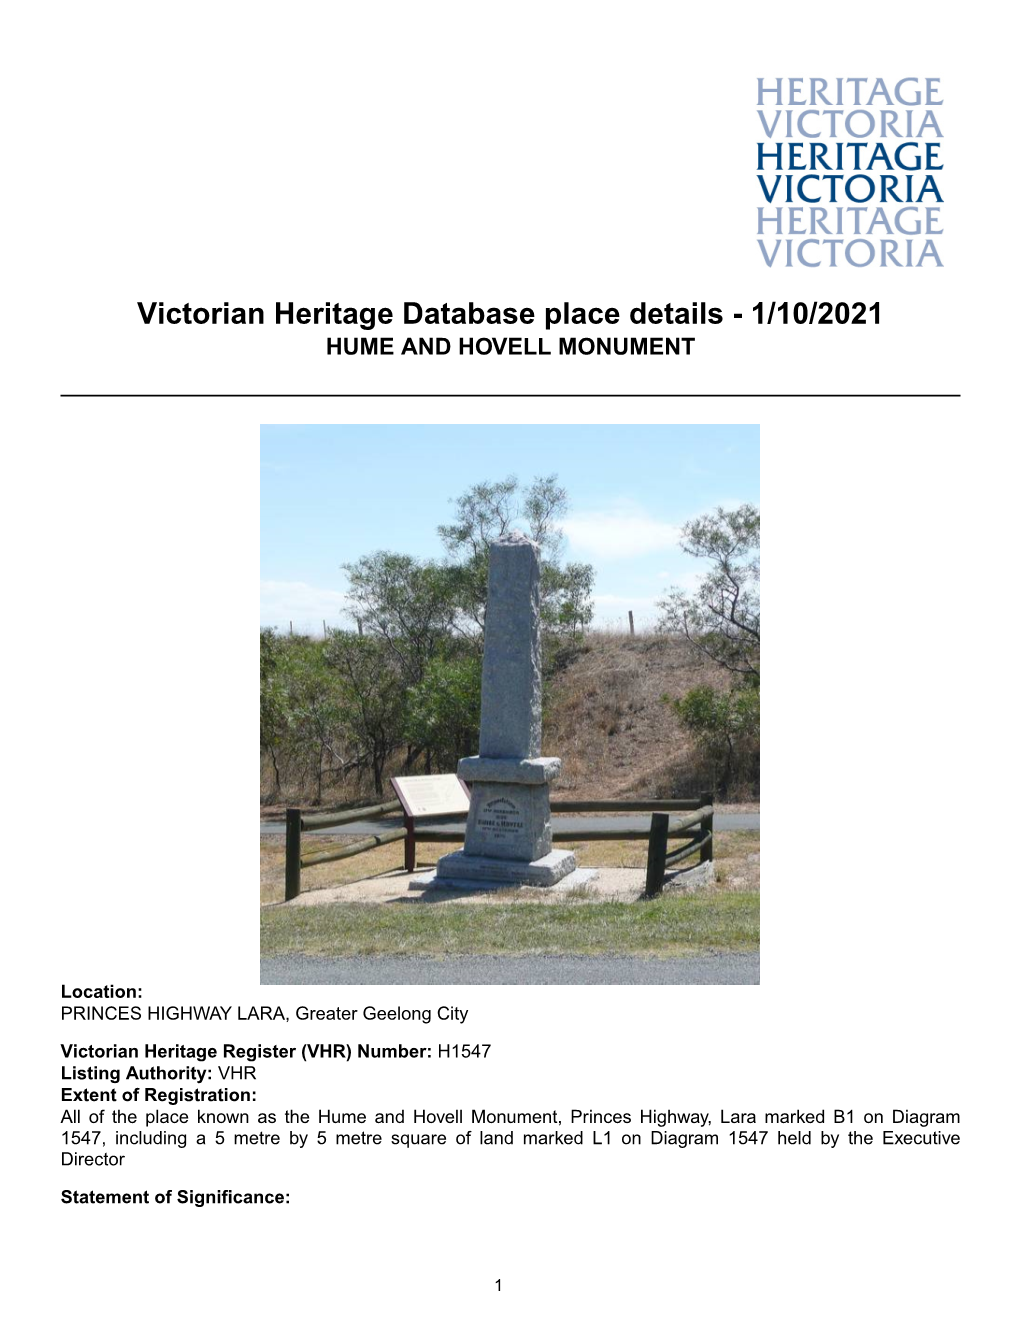 Victorian Heritage Database Place Details - 1/10/2021 HUME and HOVELL MONUMENT